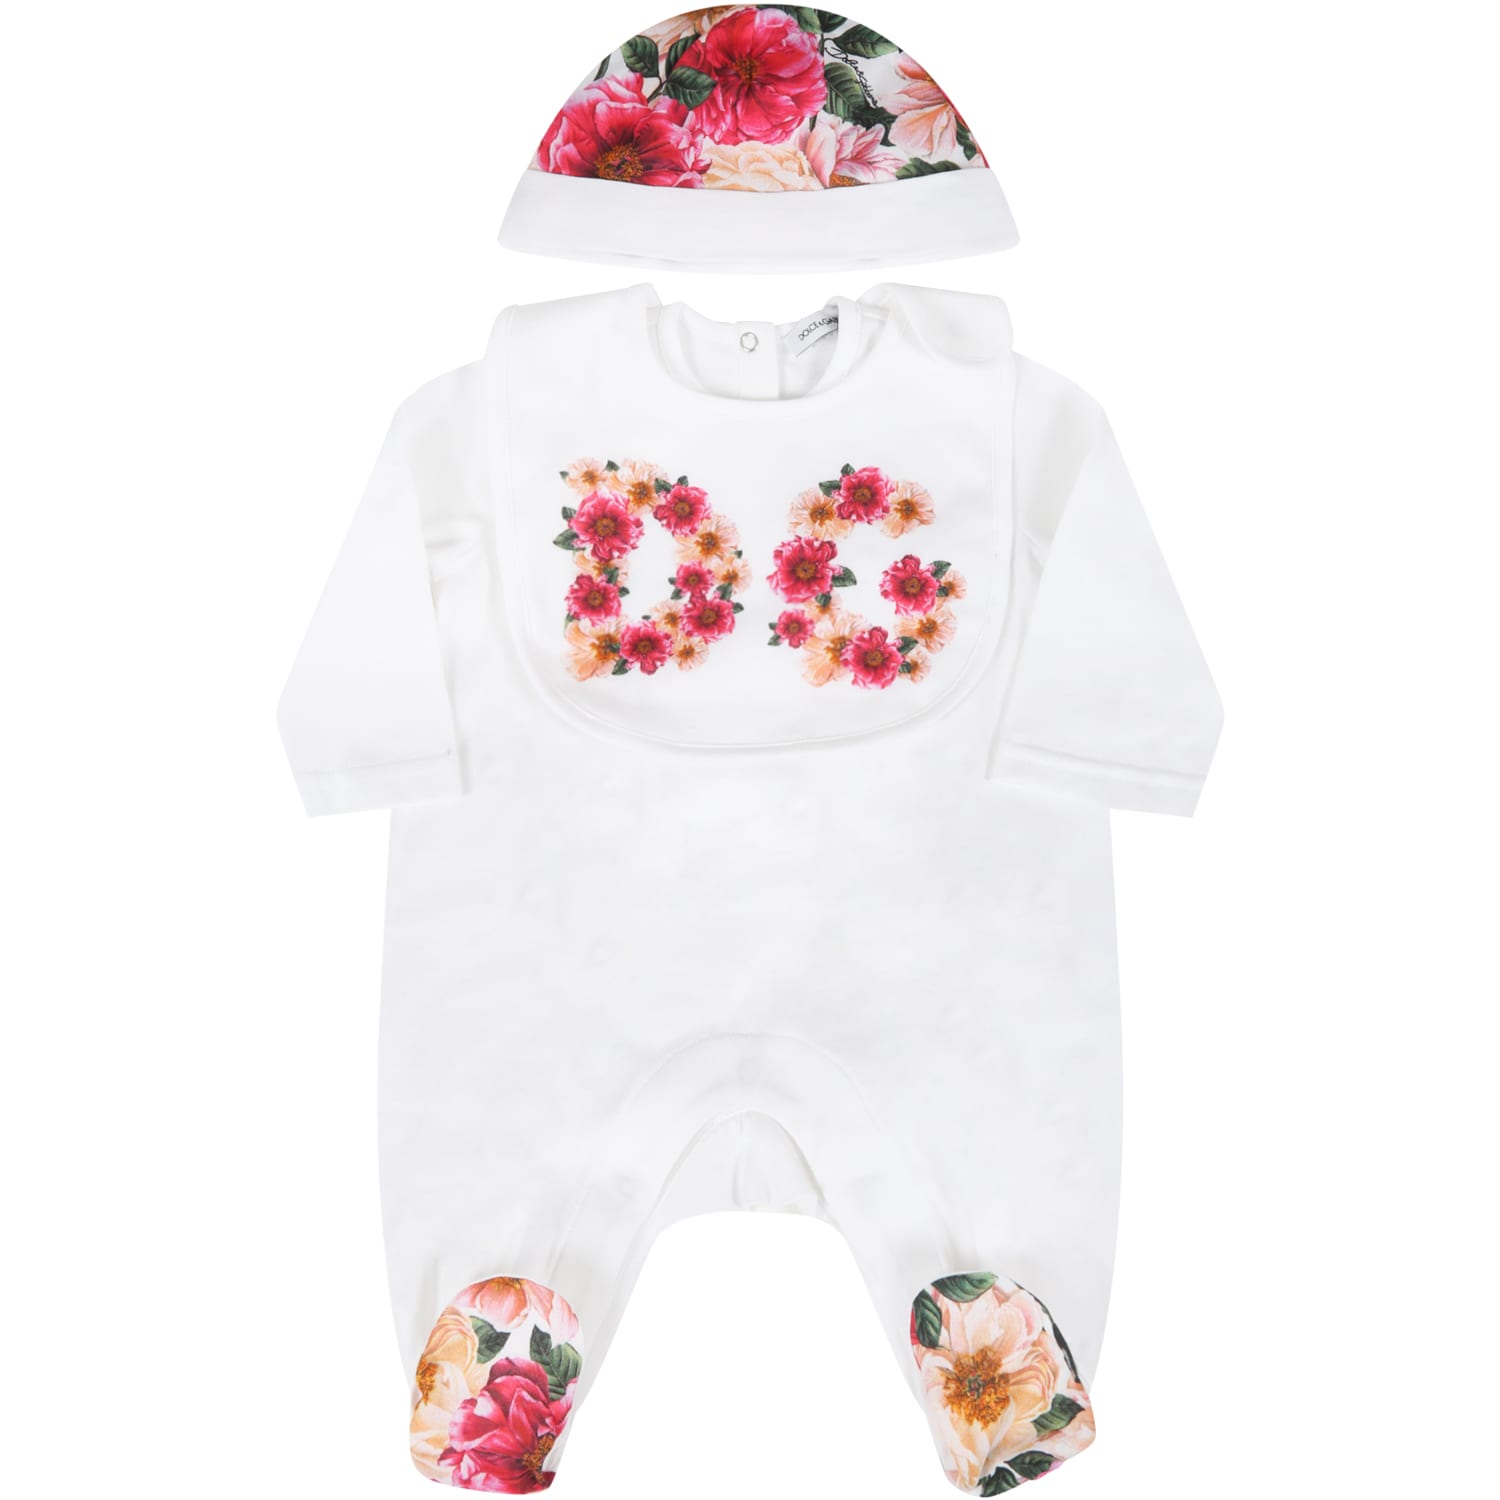 Dolce & Gabbana White Set For Baby Girl With Flowers